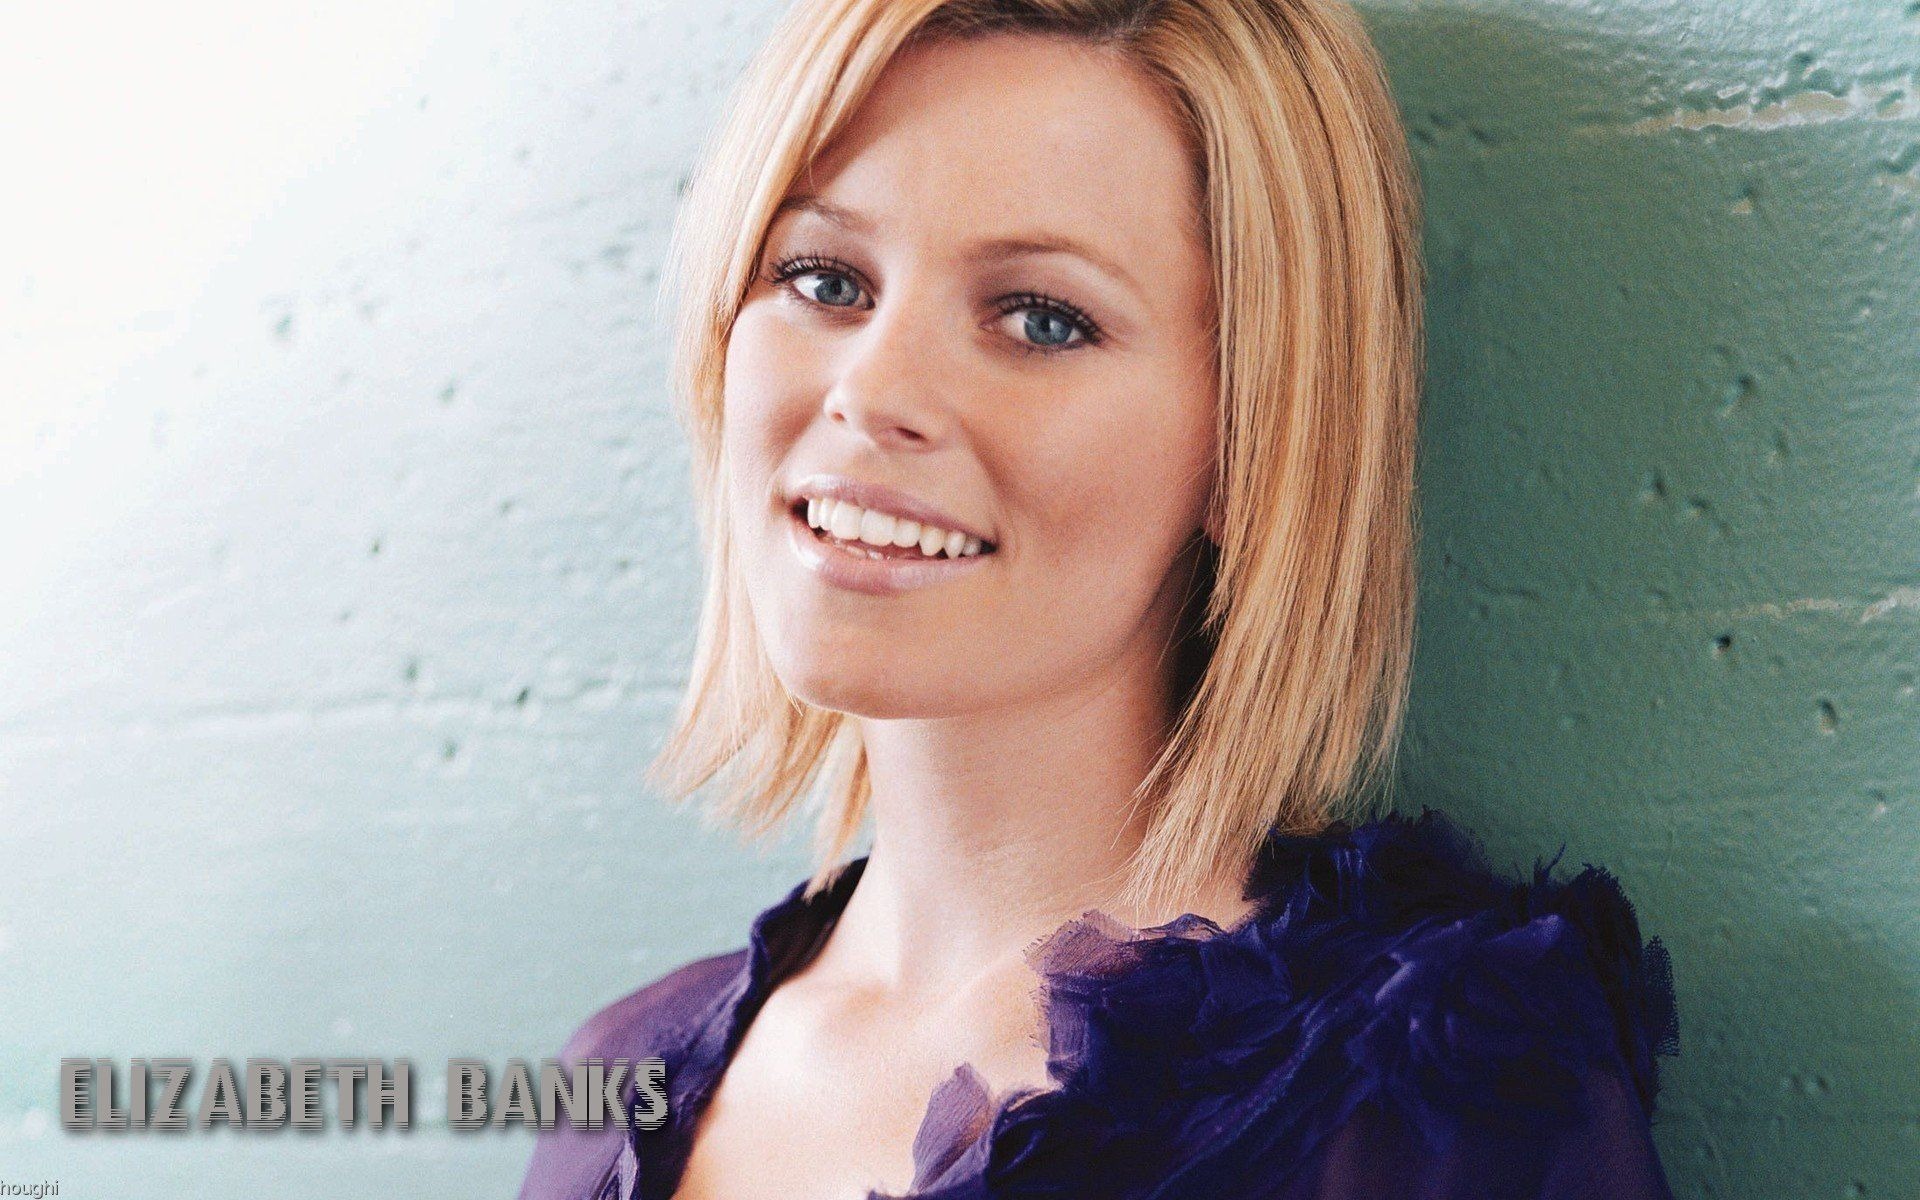 Elizabeth Banks #001 - 1920x1200 Wallpapers Pictures Photos Images